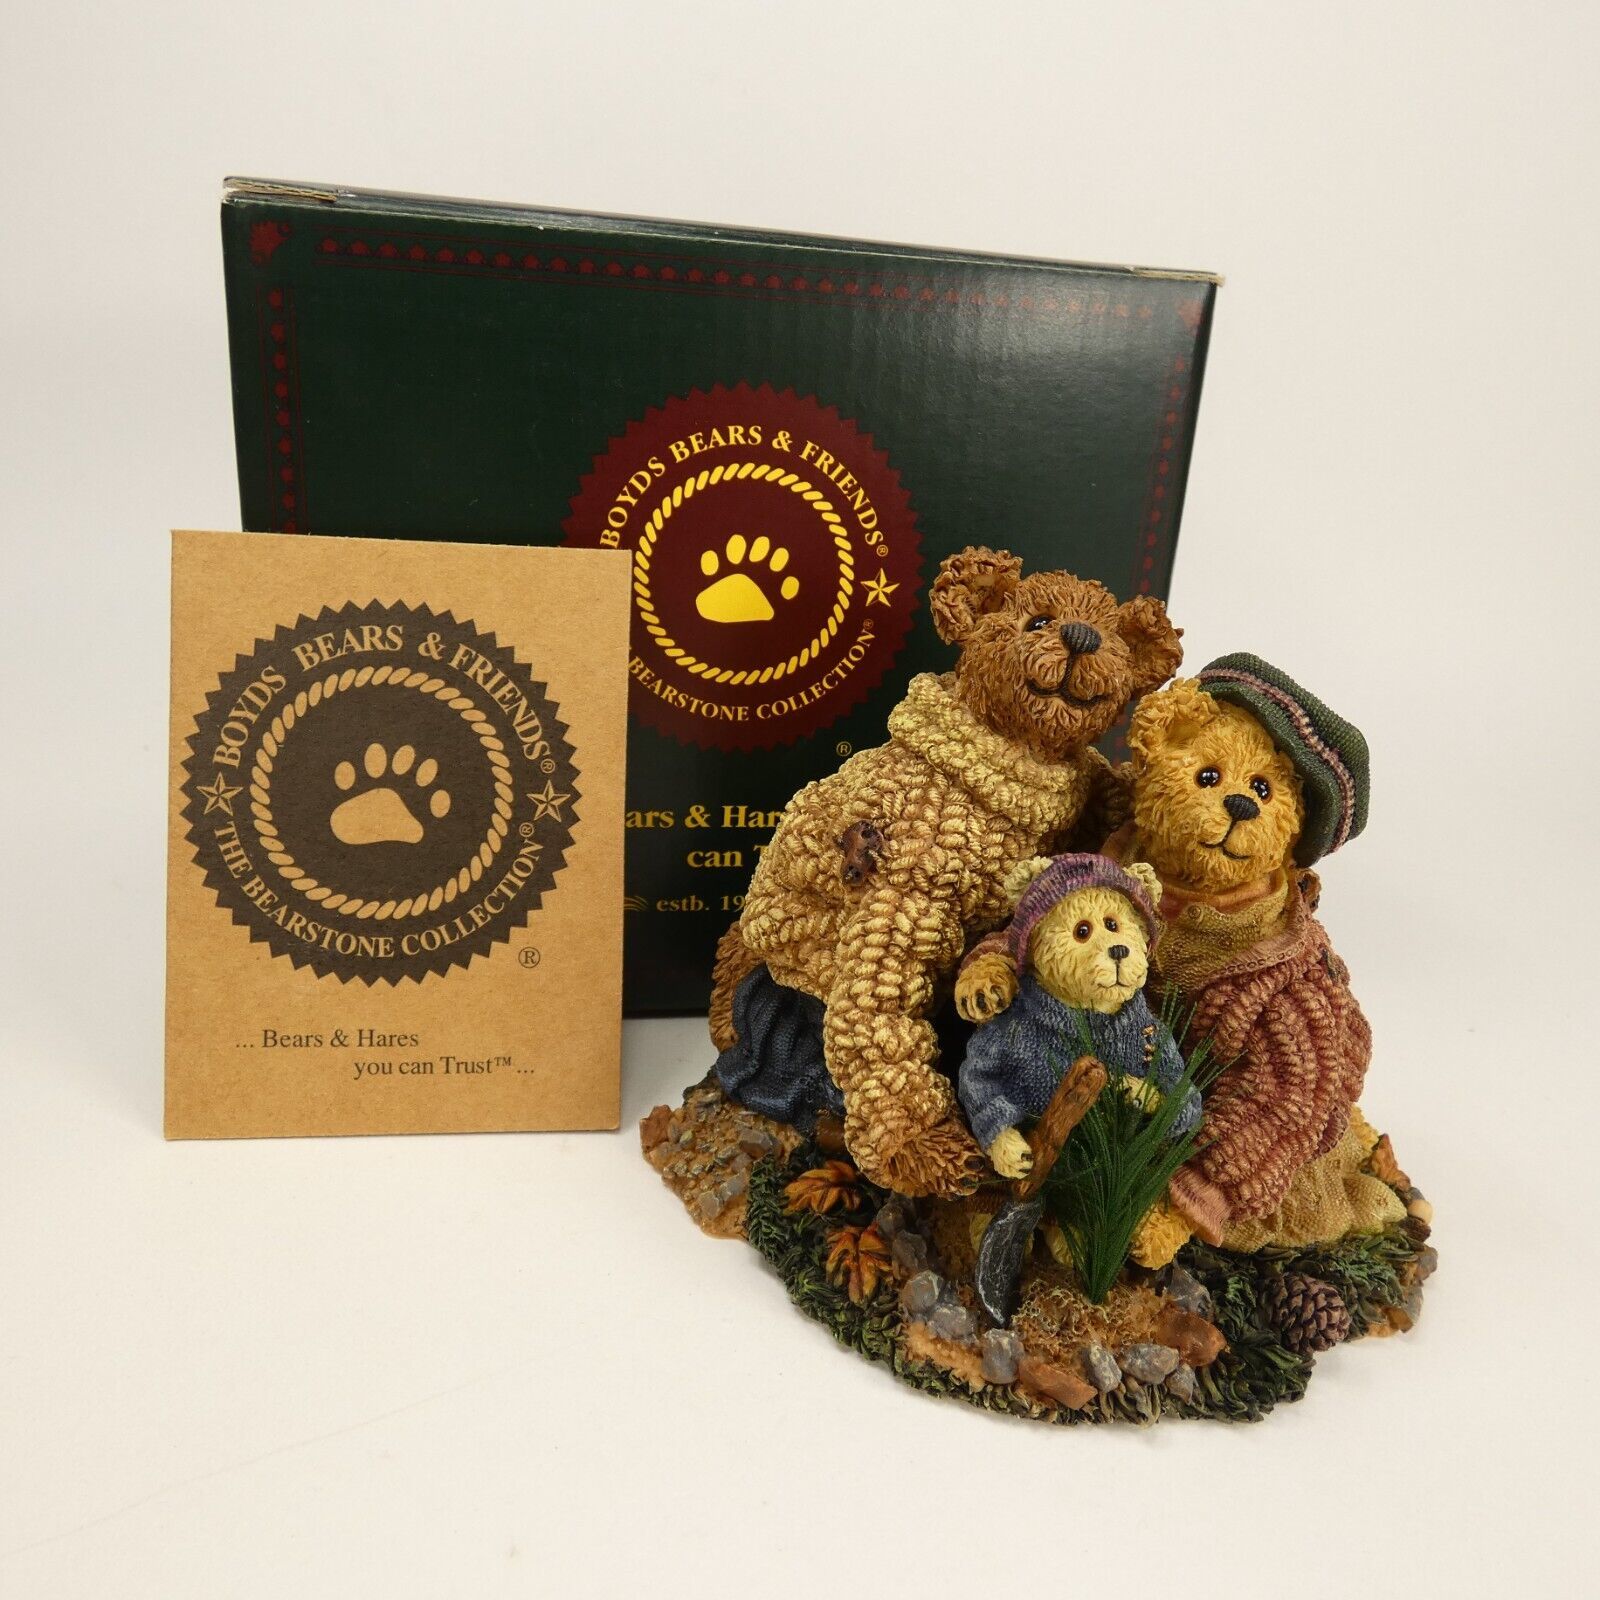 Primary image for Boyds Bears & Friends, Sephanie, John & George, Family Tree #228348, 2001 QGJY0